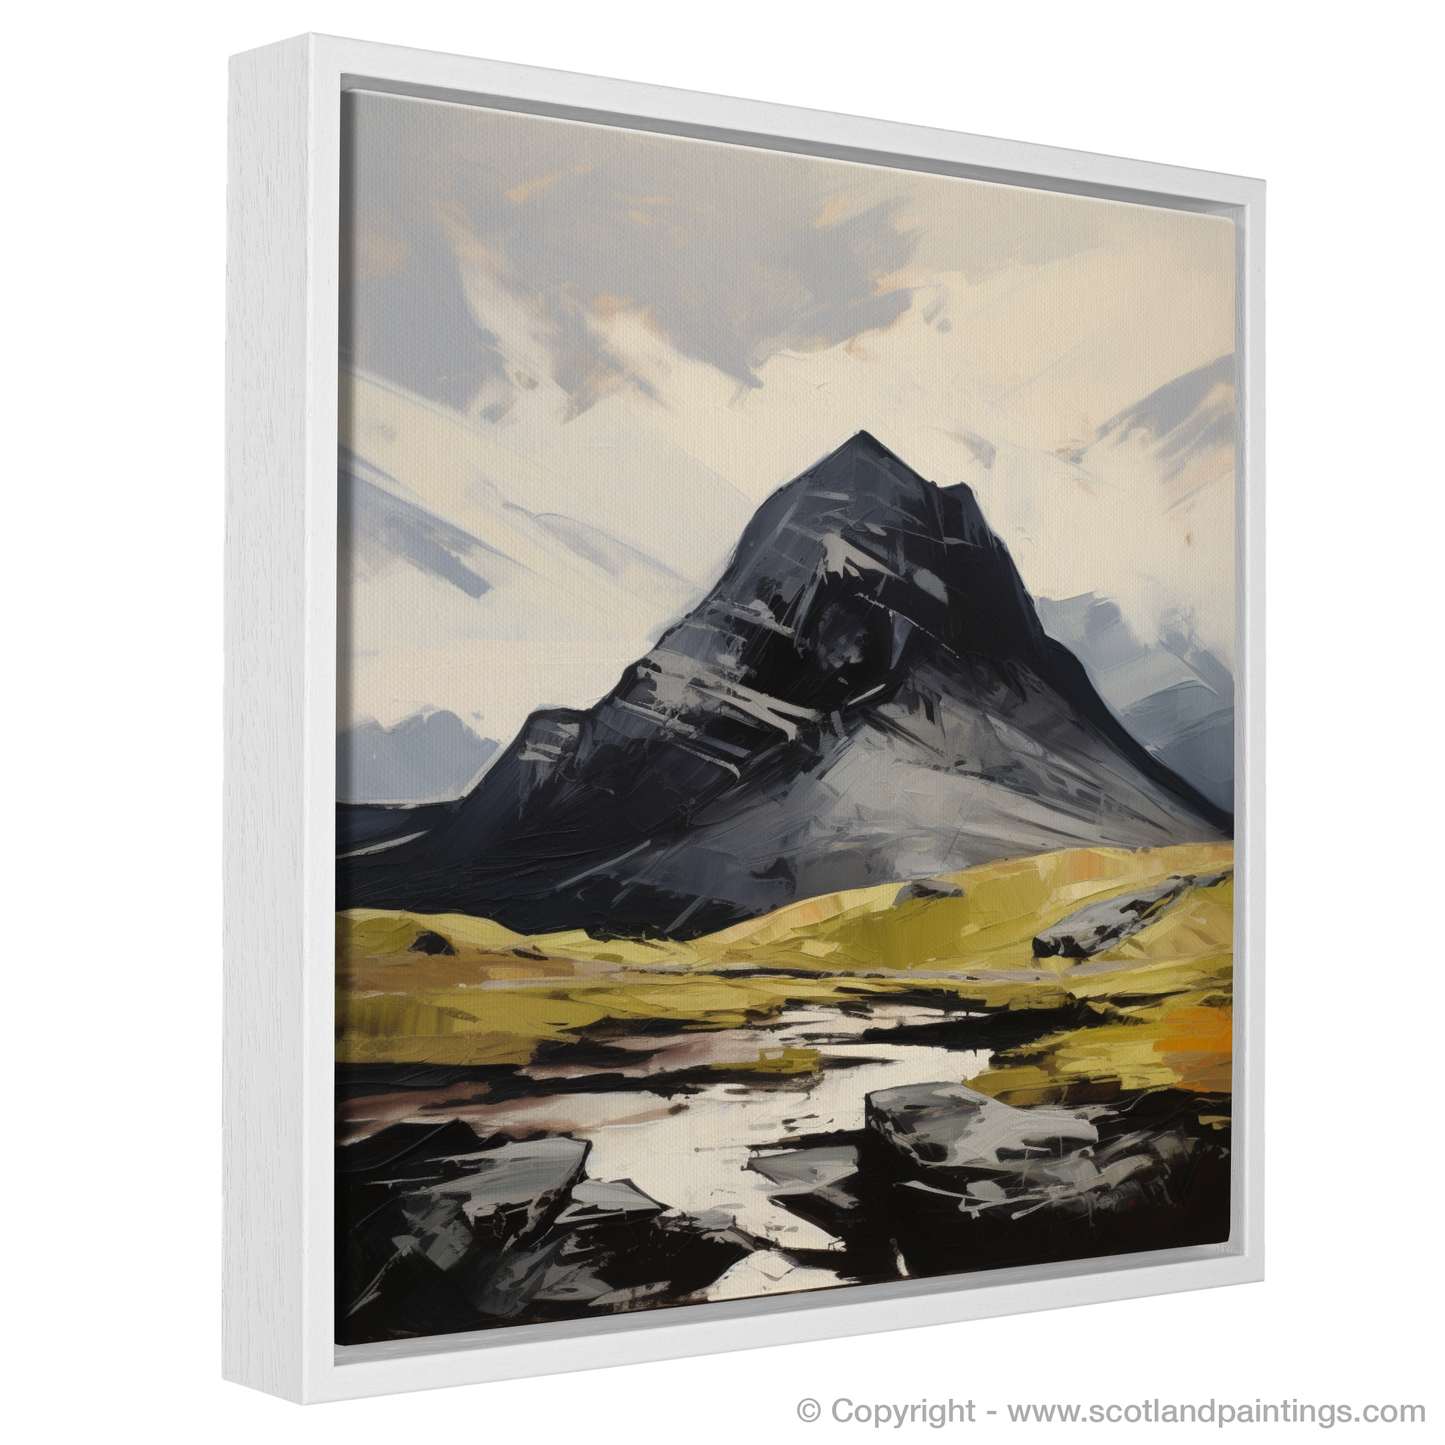 Painting and Art Print of Ben More Assynt, Sutherland entitled "Expressionist Majesty of Ben More Assynt".